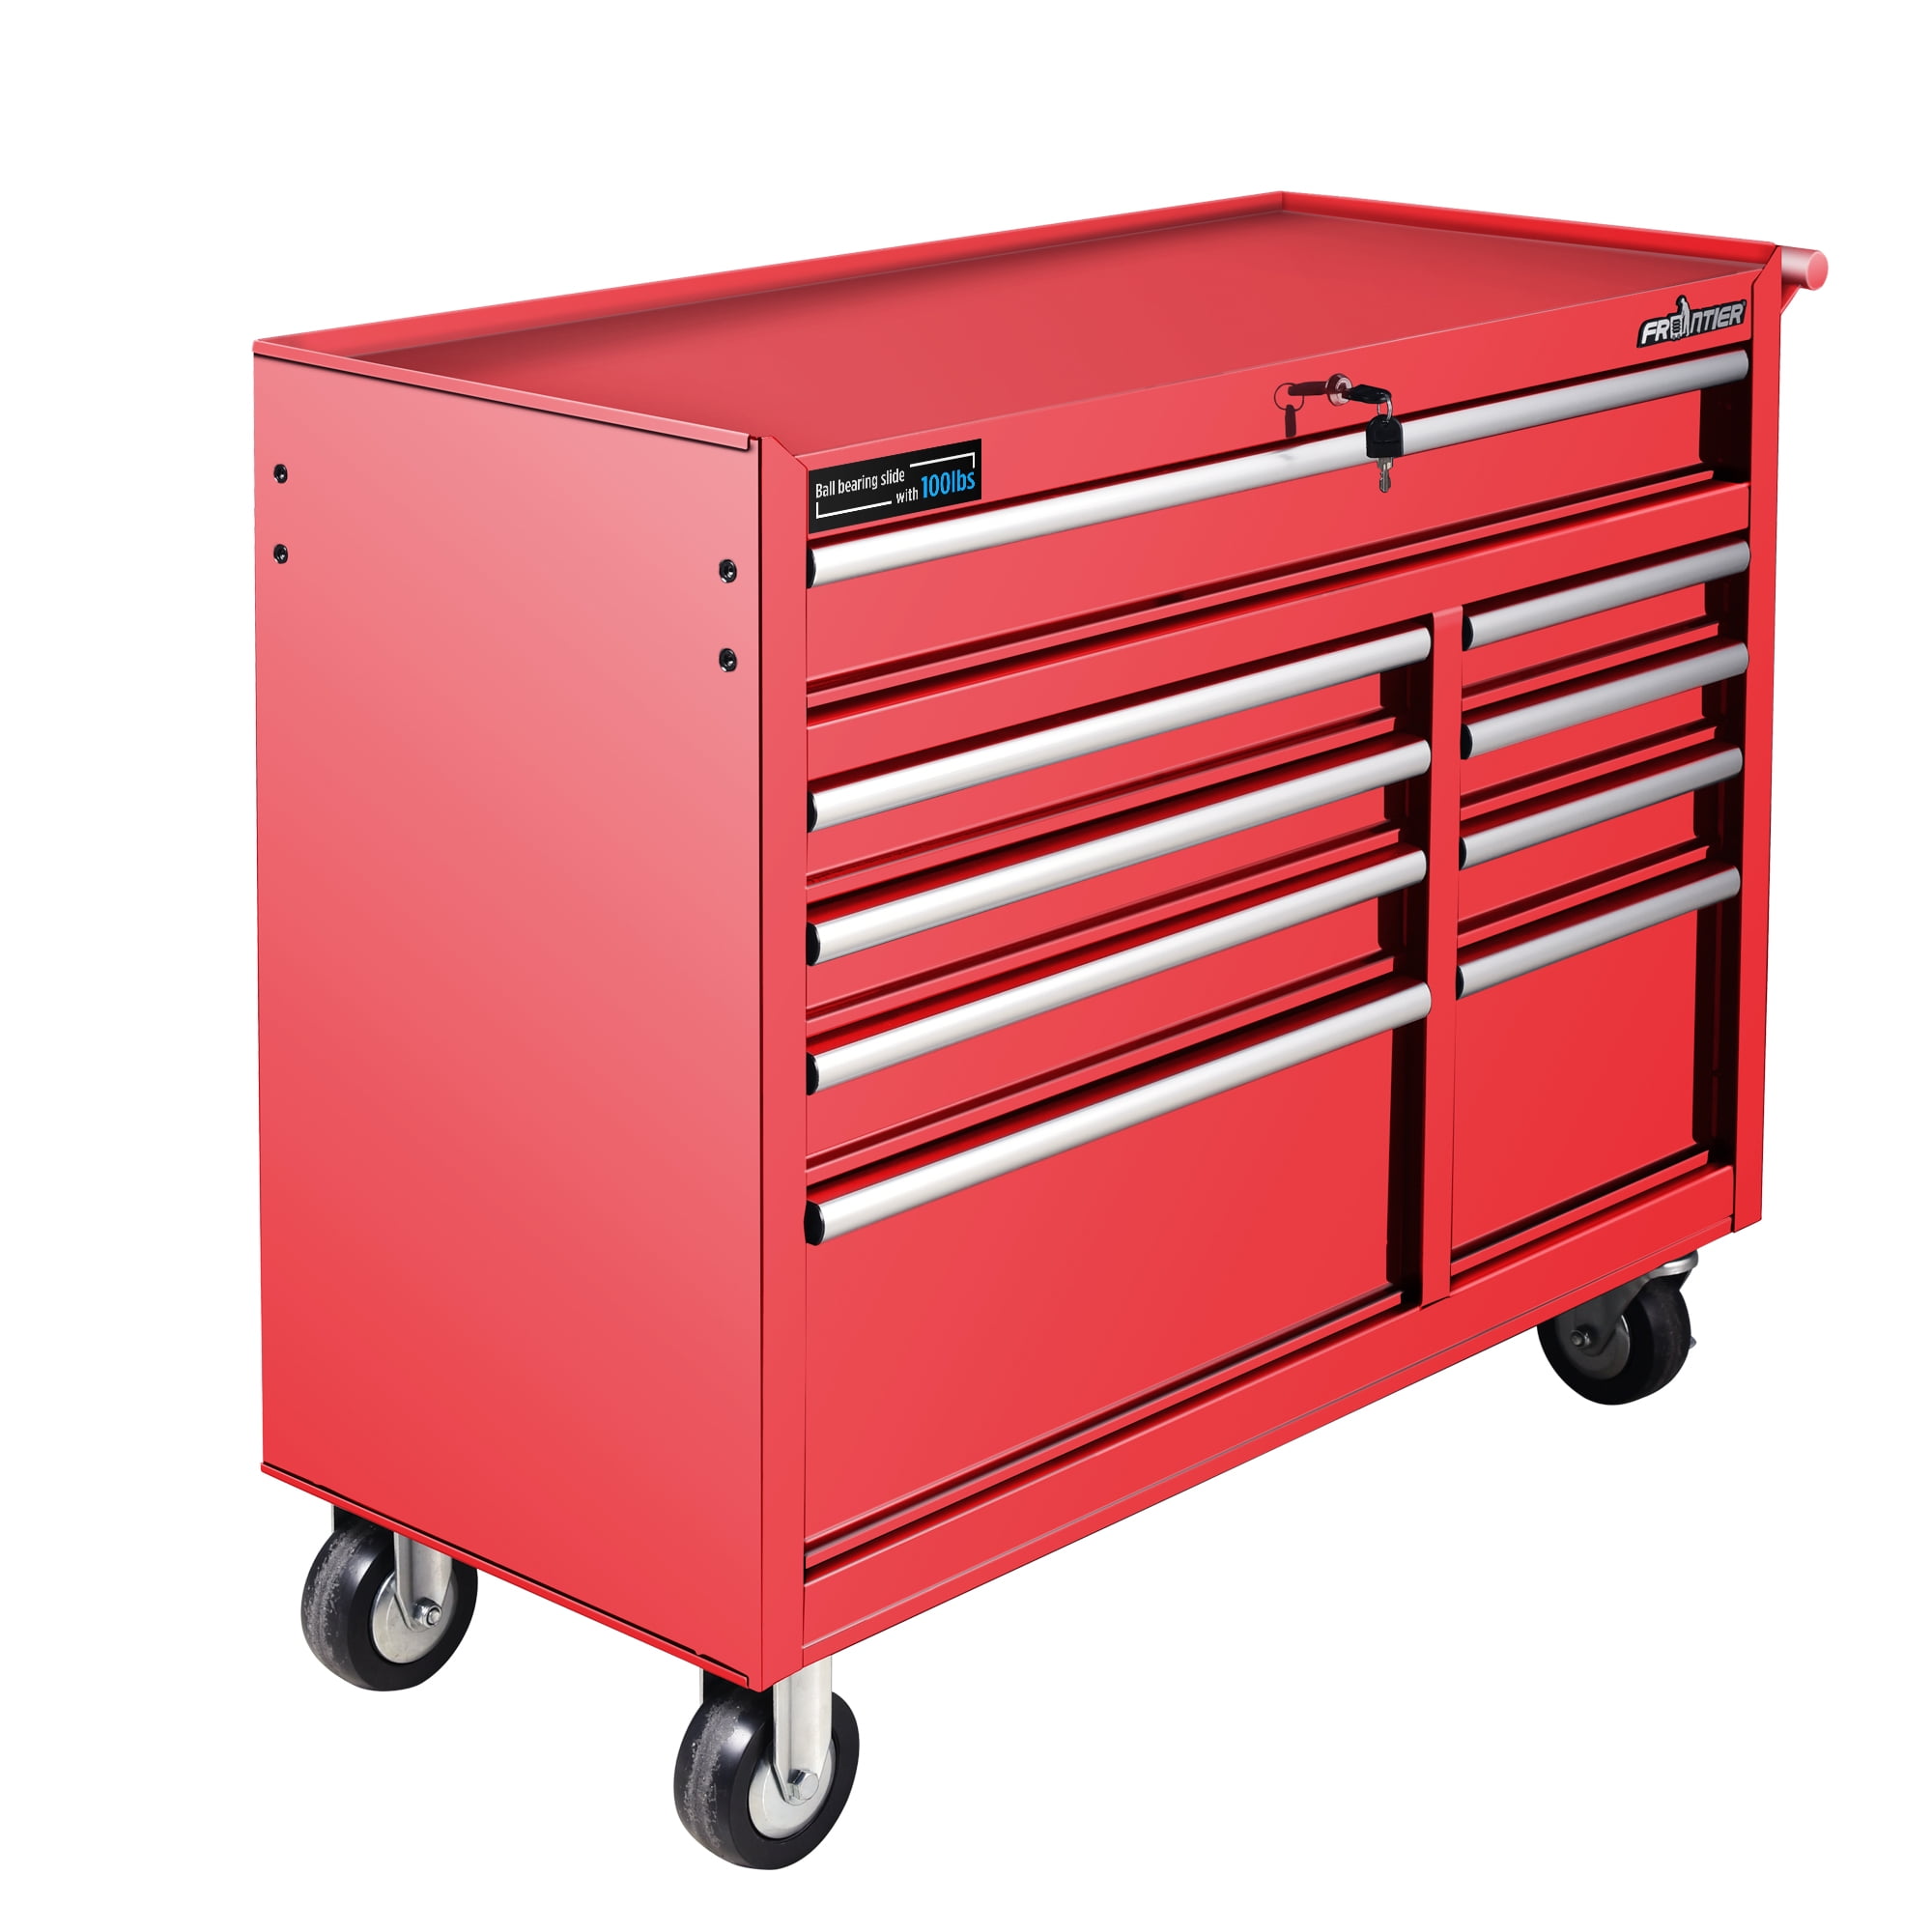 Custom Tool Box Cover by Dmarrco fits US General 42 in 18 in Roller toolbox 